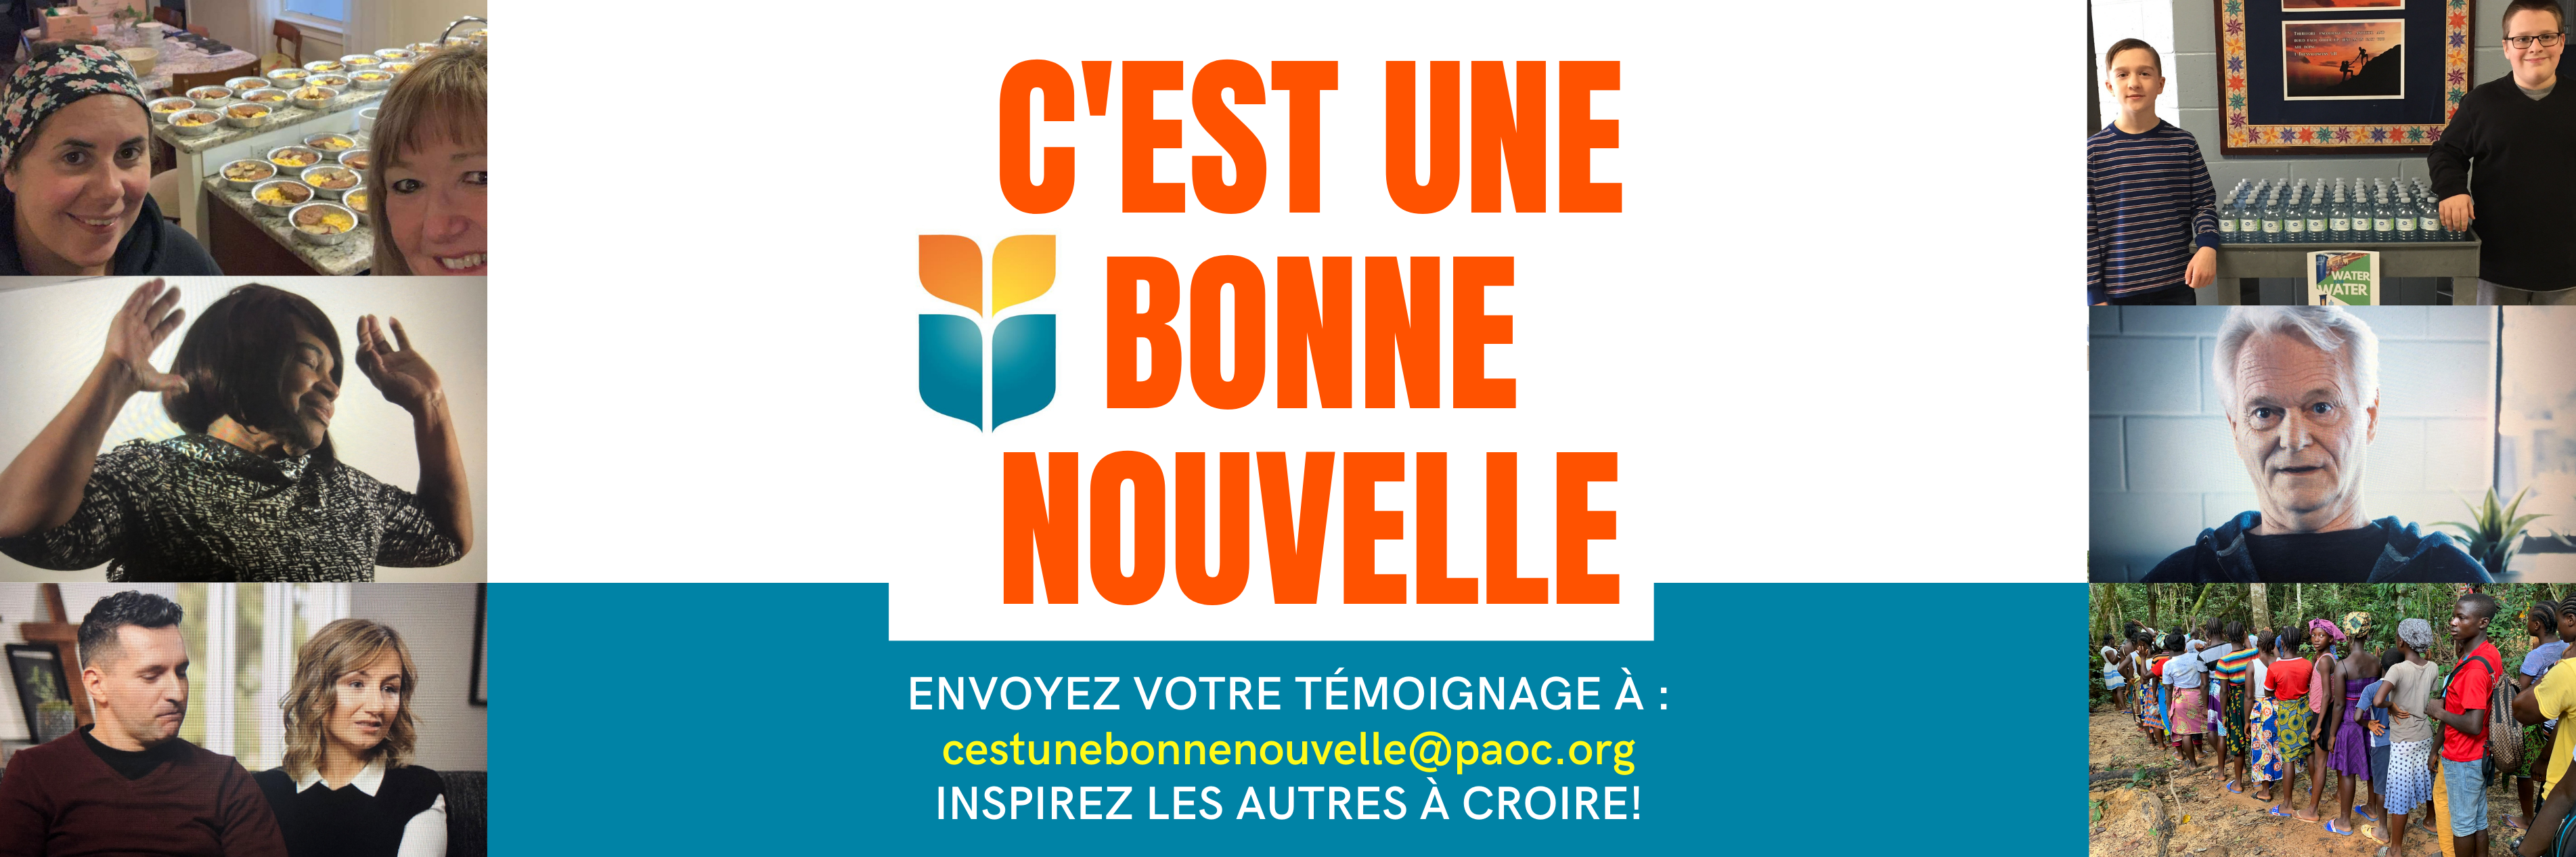 French Home Page Hero Banner - This is Good News . Cest Une Bonne Nouvelle